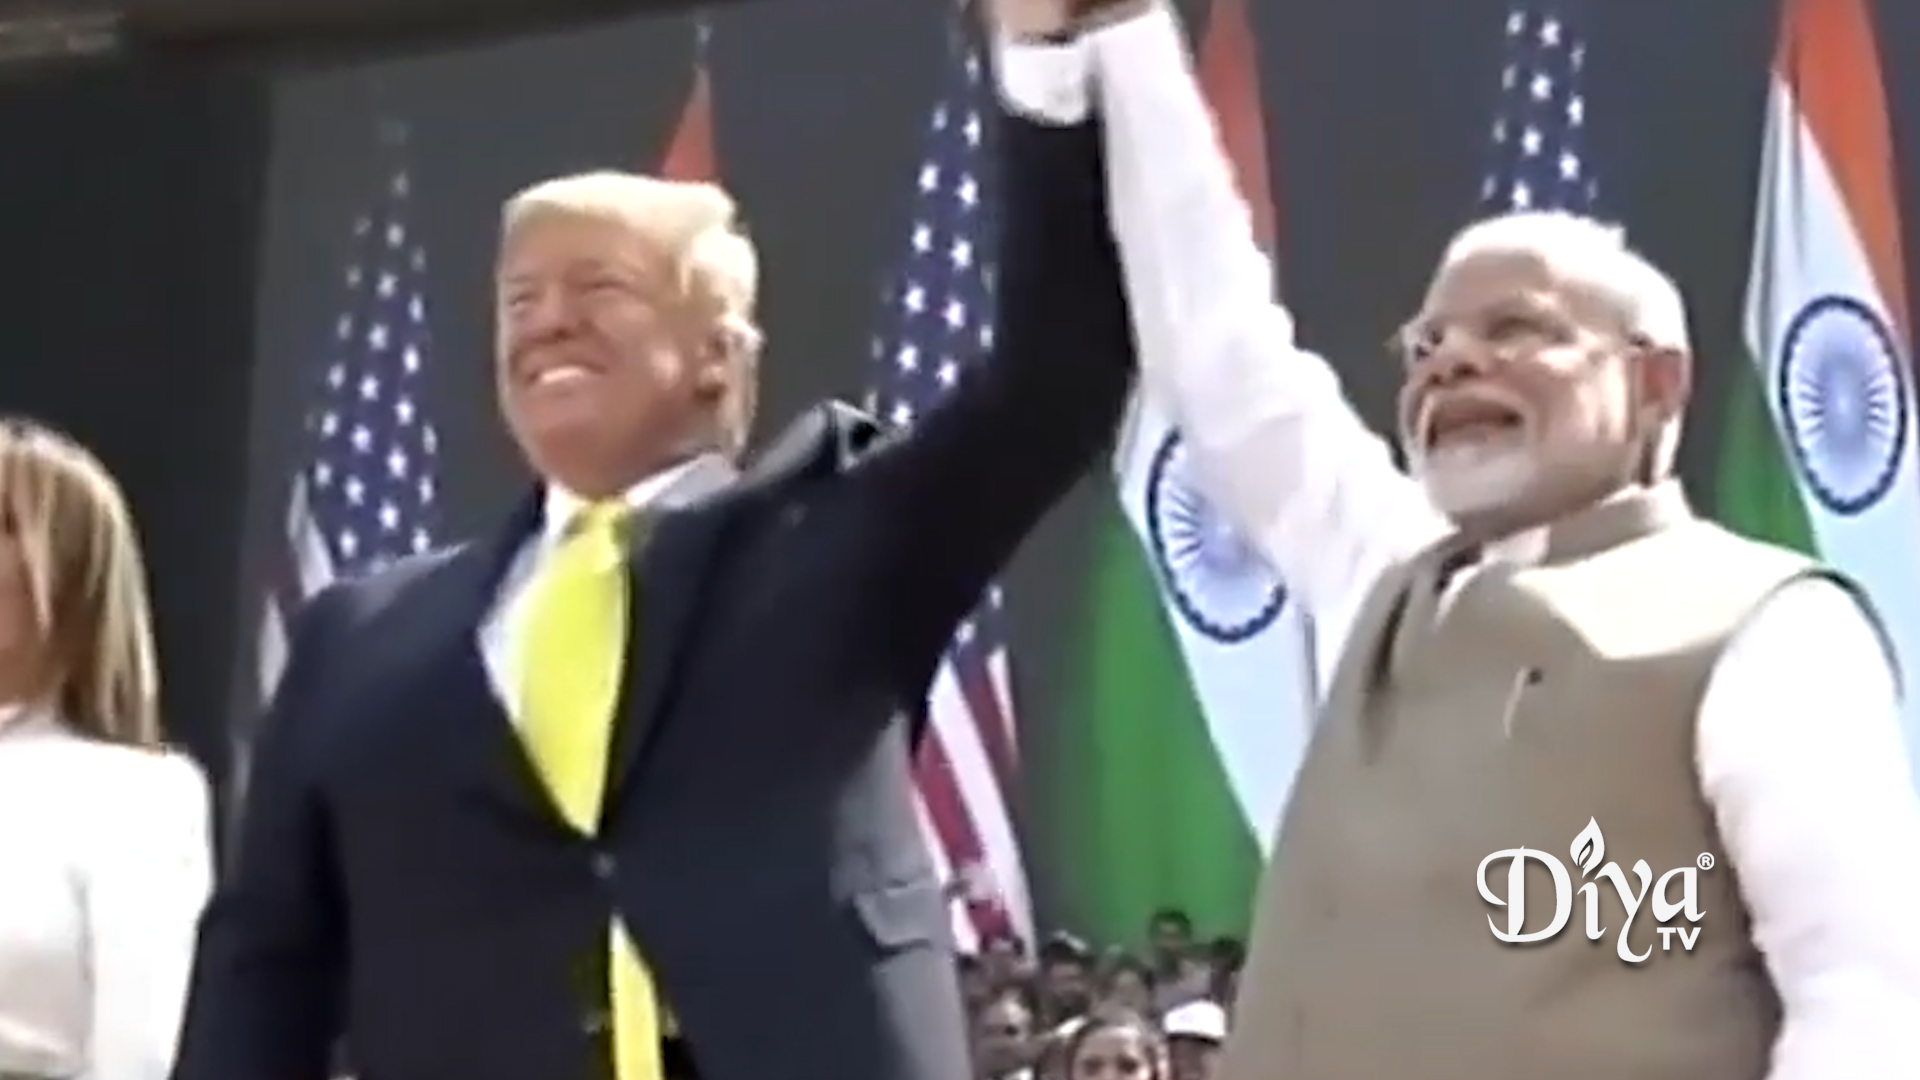 Trump thanks Modi on sale of hydroxychloroquine to U.S.: ‘We’ll remember it’